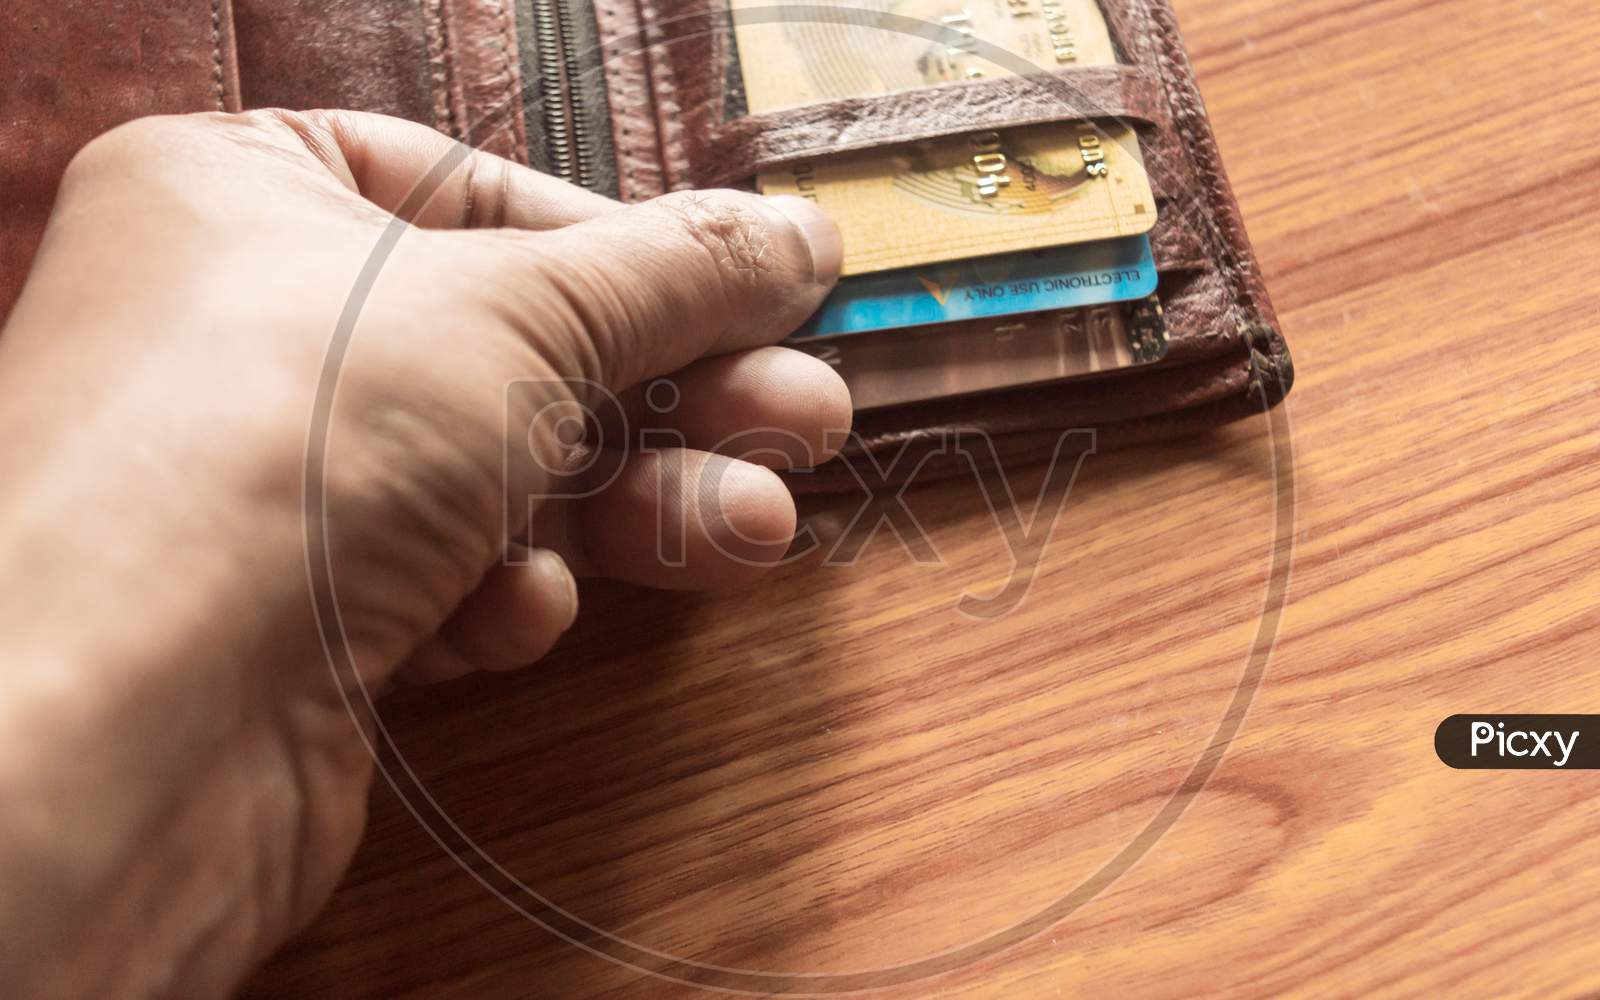 Man'S Hand Pulls Out A Credit Card Out Of A Money Purse. Cropped Close-Up Image. Wood Table Background.